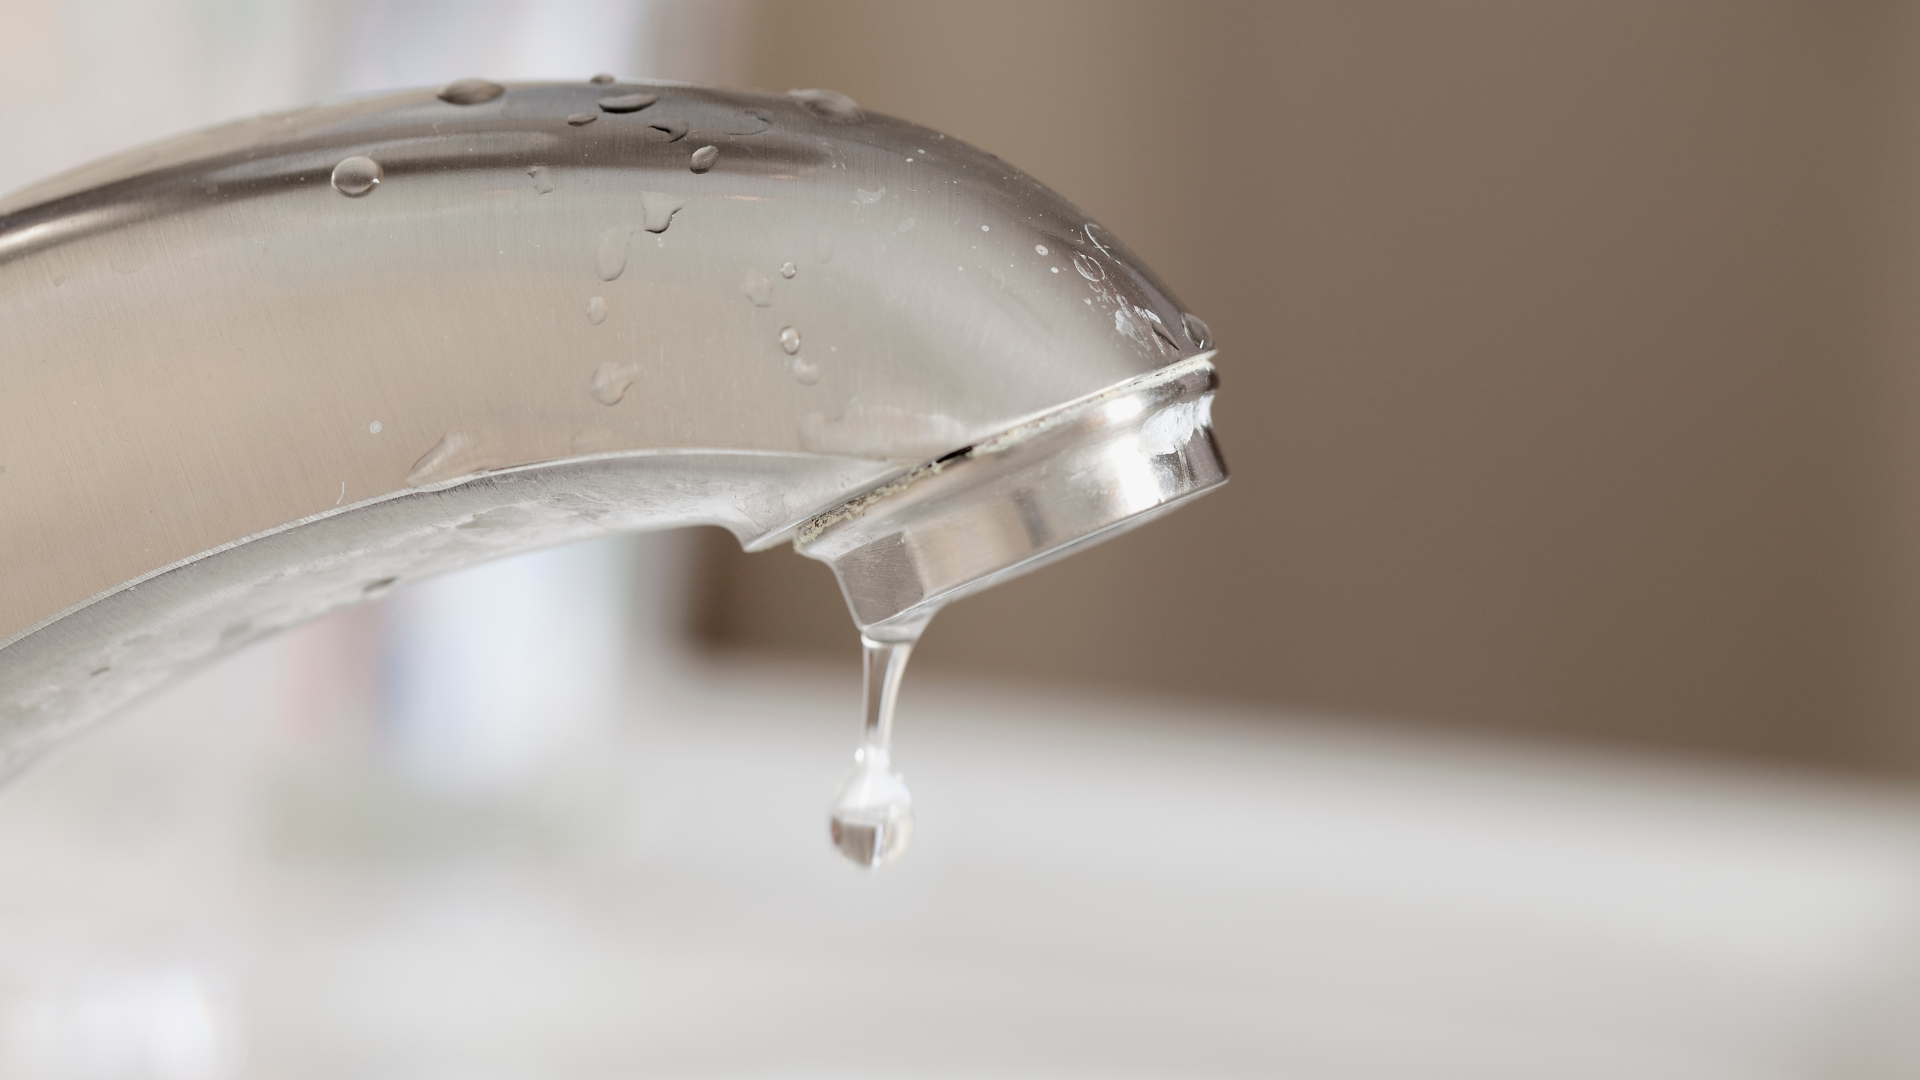 Discover how to fix a leaky faucet and how to avoid the issue with Cornel's Plumbing. Contact us today to learn more!